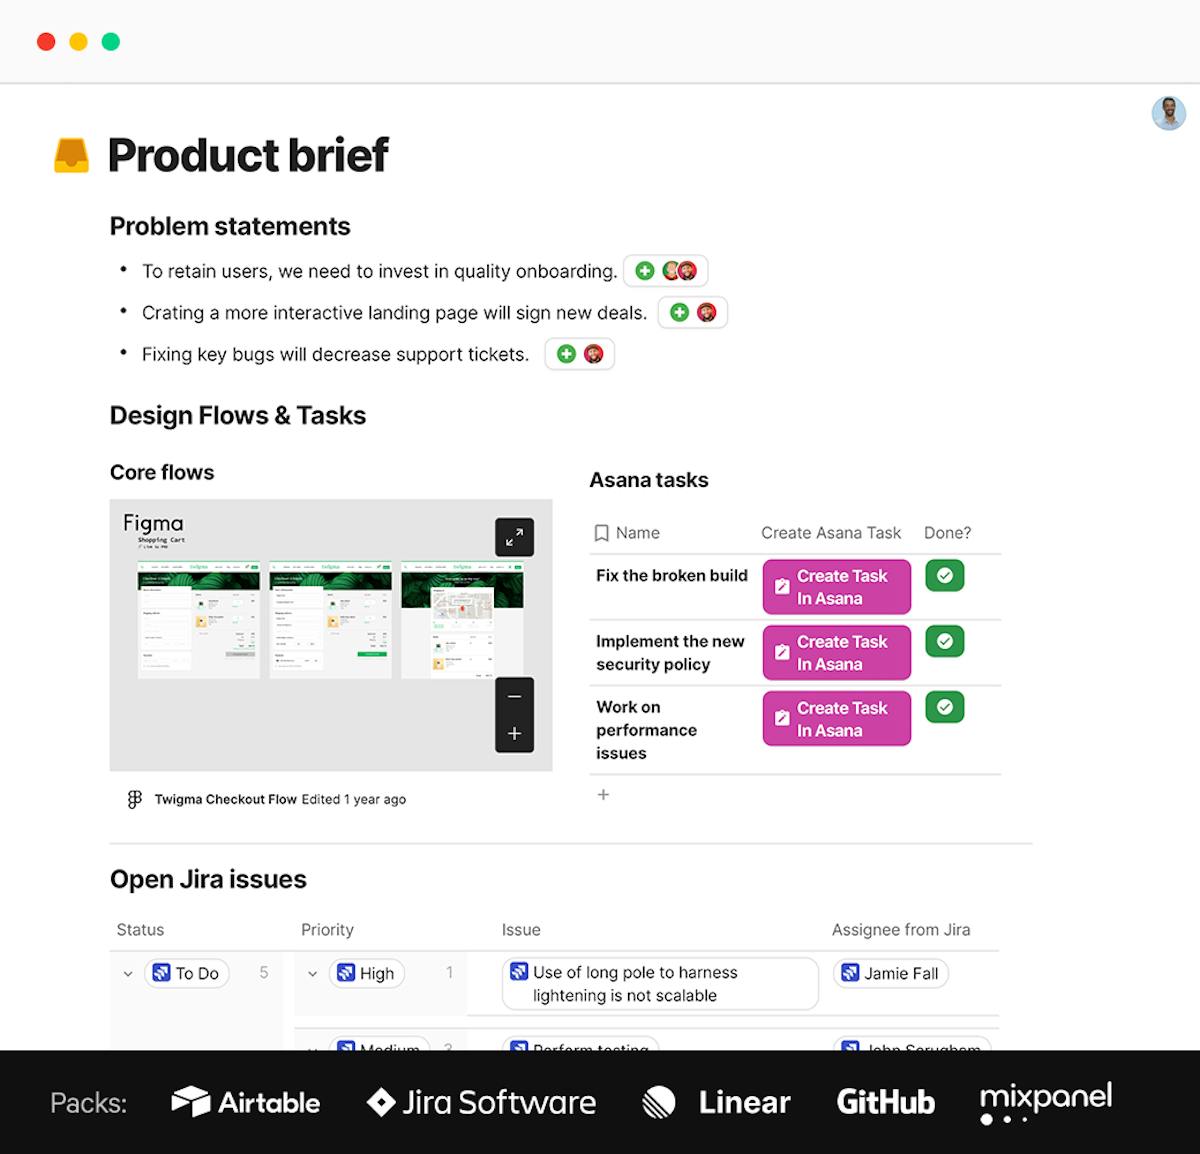 Product brief built in Coda - shows problem statements, design flows and Jira tickets in one central place.